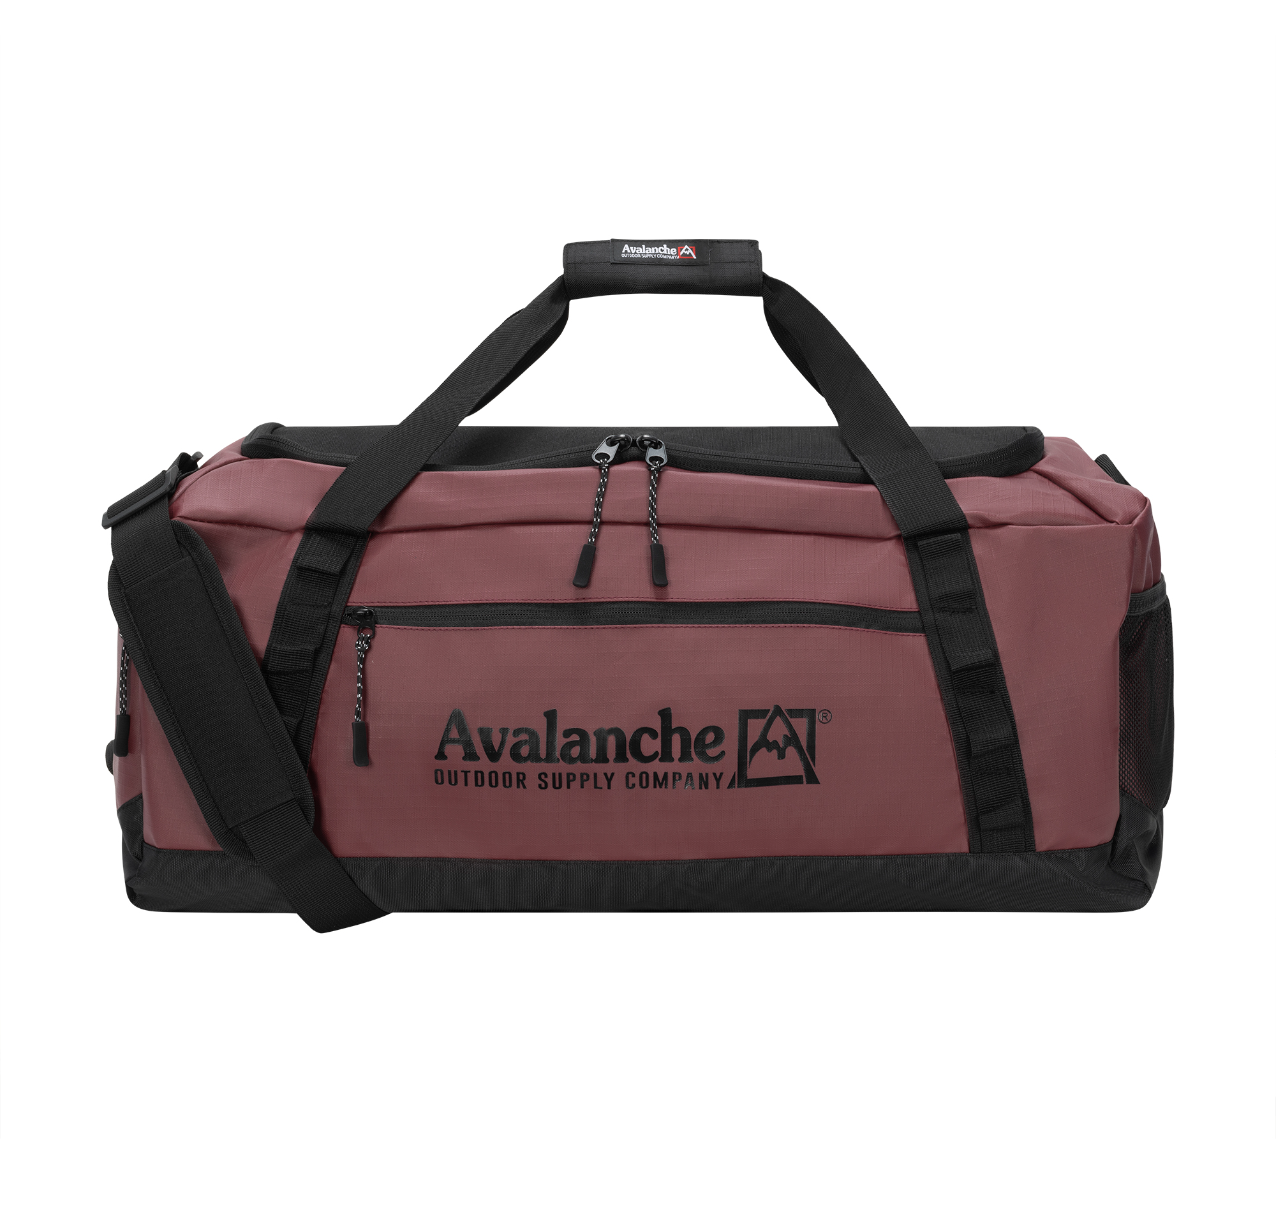 Avalanche Outdoor Supply Company 22 Inch Rolling Duffel 67 L